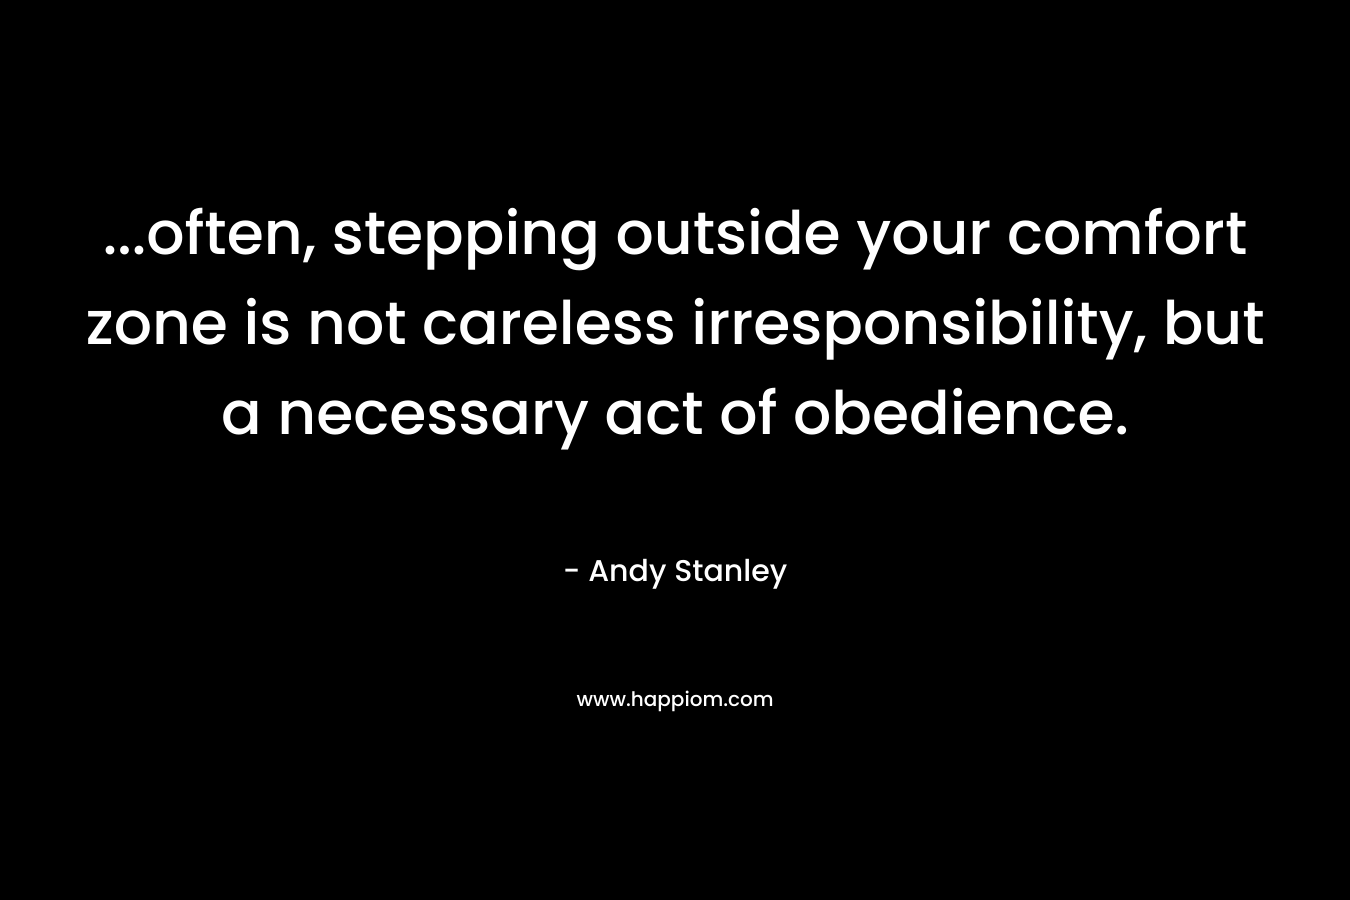 …often, stepping outside your comfort zone is not careless irresponsibility, but a necessary act of obedience. – Andy Stanley